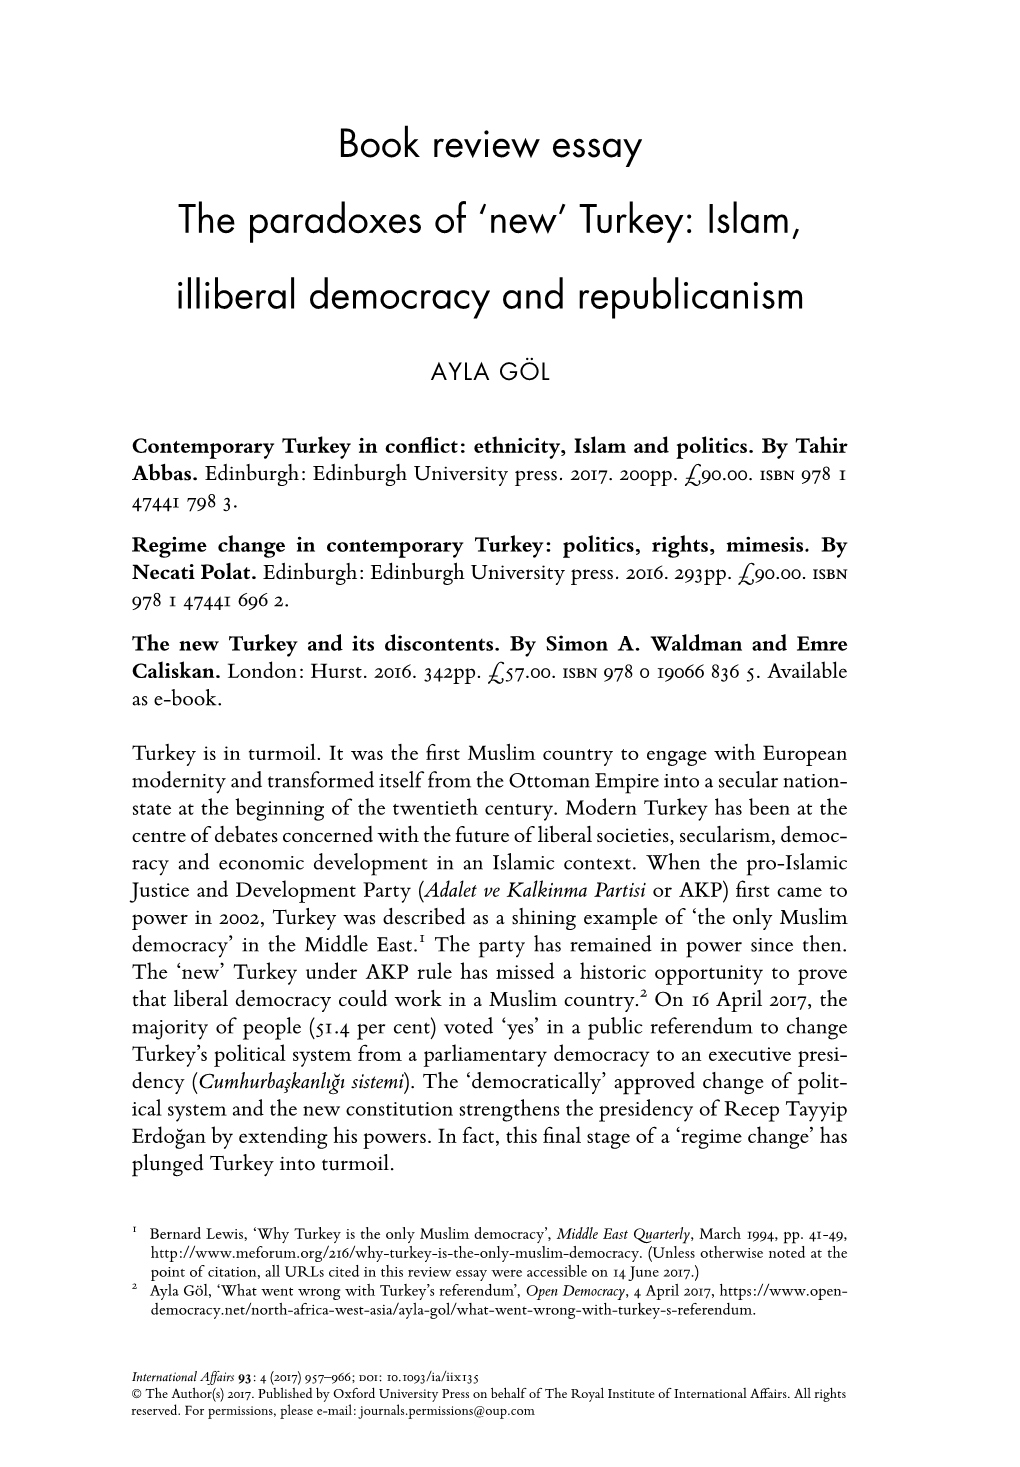 Book Review Essay the Paradoxes of 'New' Turkey: Islam, Illiberal Democracy and Republicanism